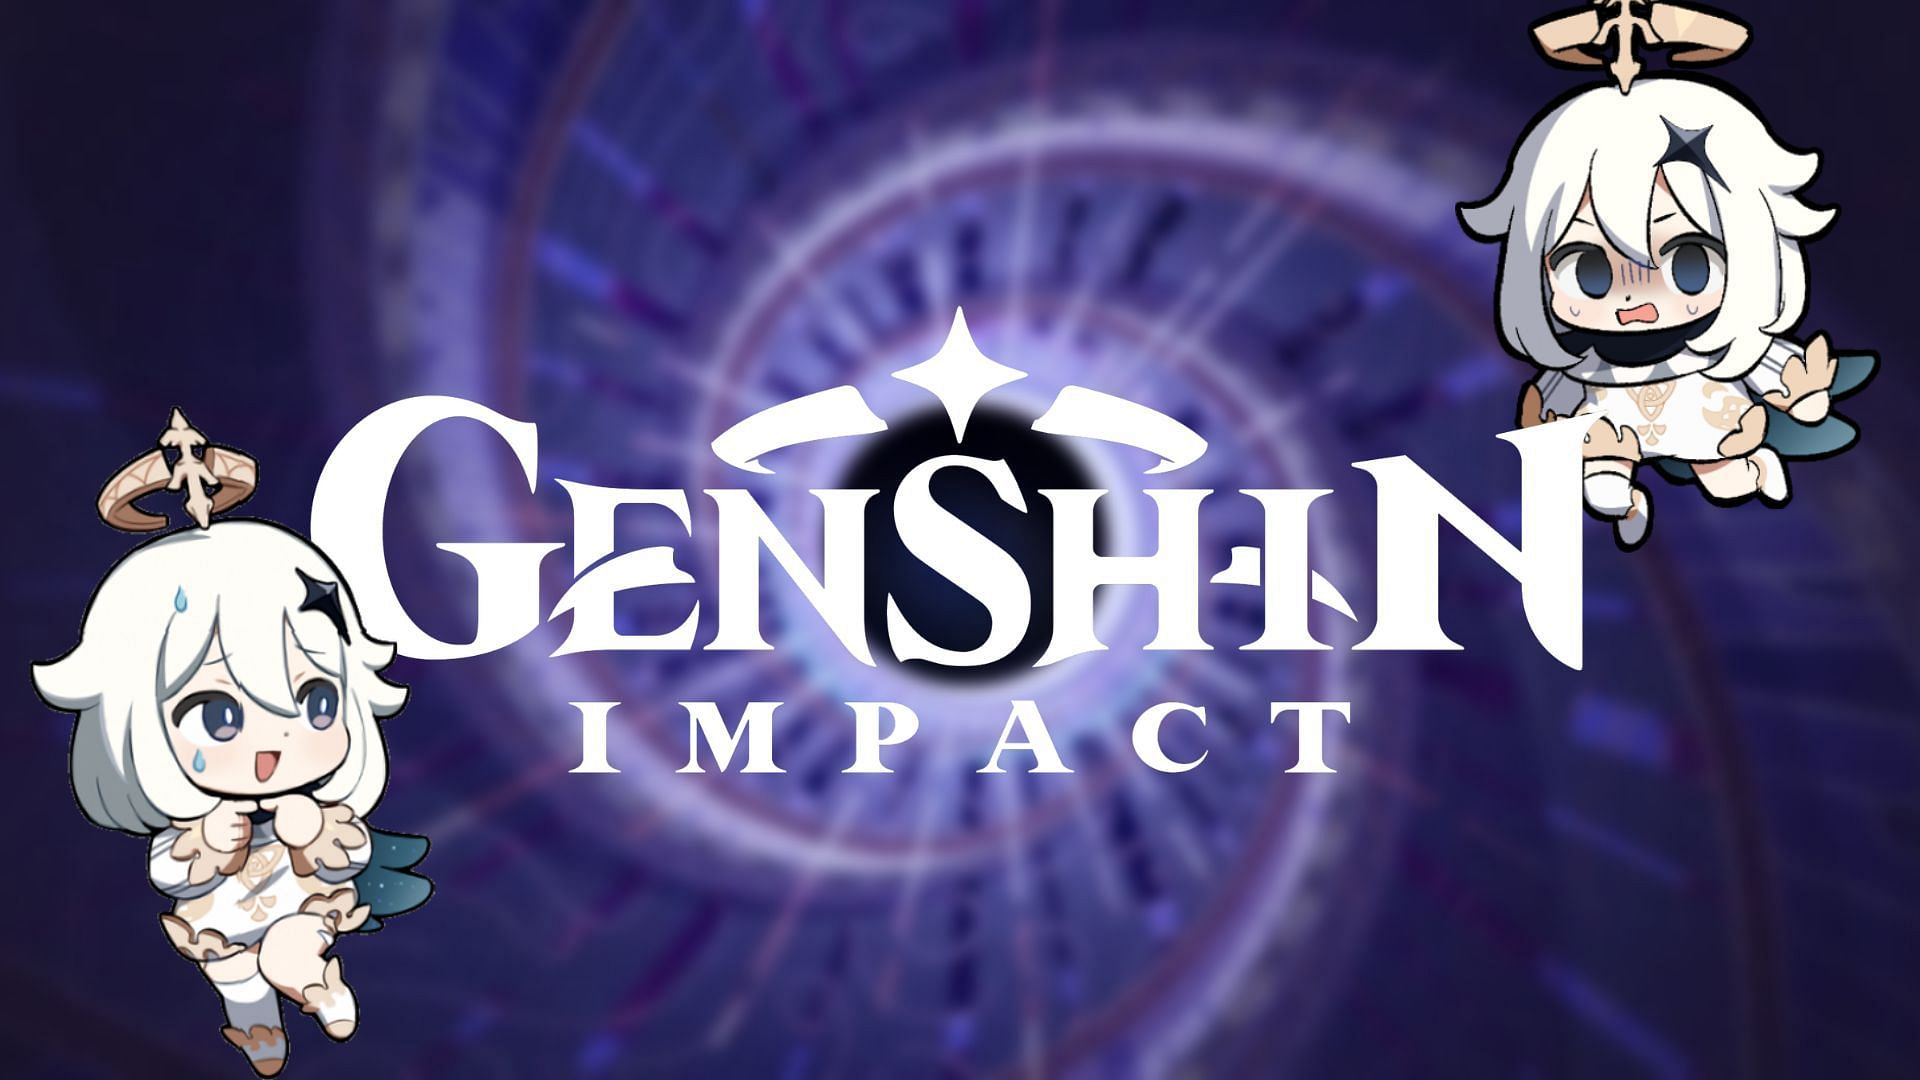 Genshin Impact' Feels Destined To Change The Gaming Industry